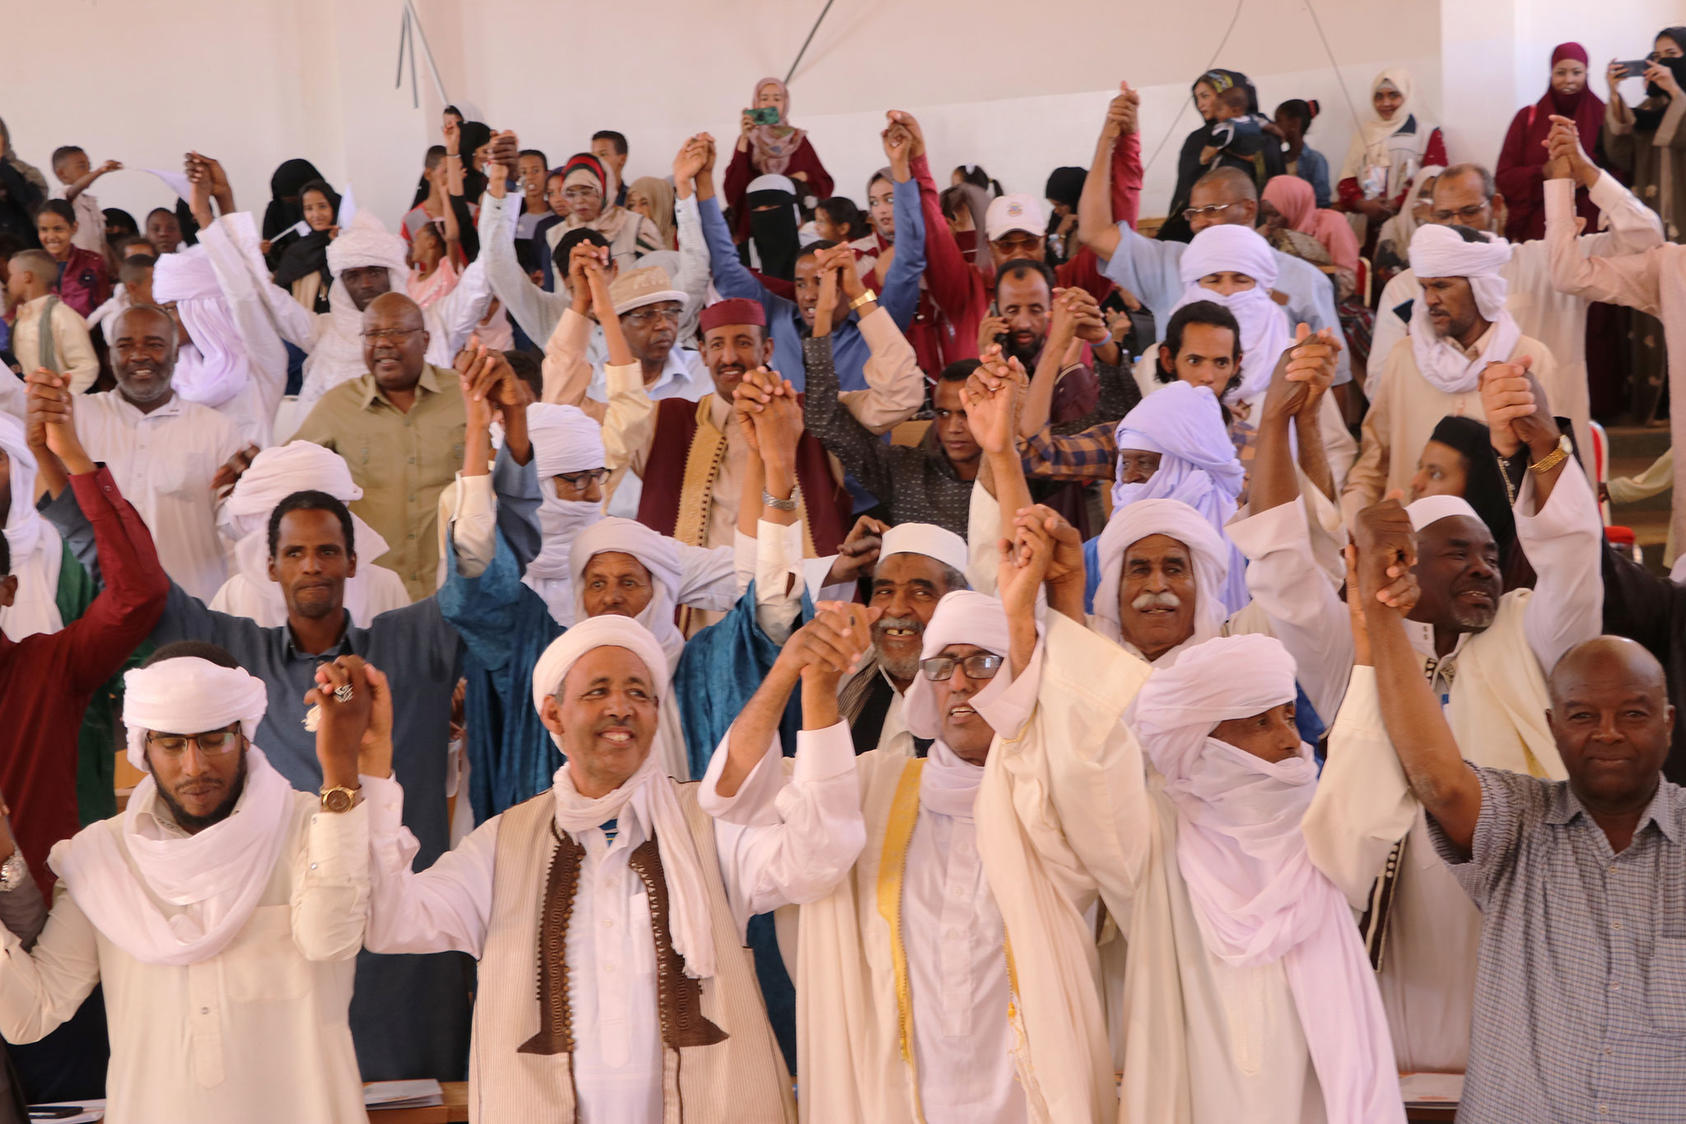 After signing a social pact against school violence, residents of the southern Libyan city of Ubari join hands during a USIP-sponsored Peace Day Celebration in September 2019. 